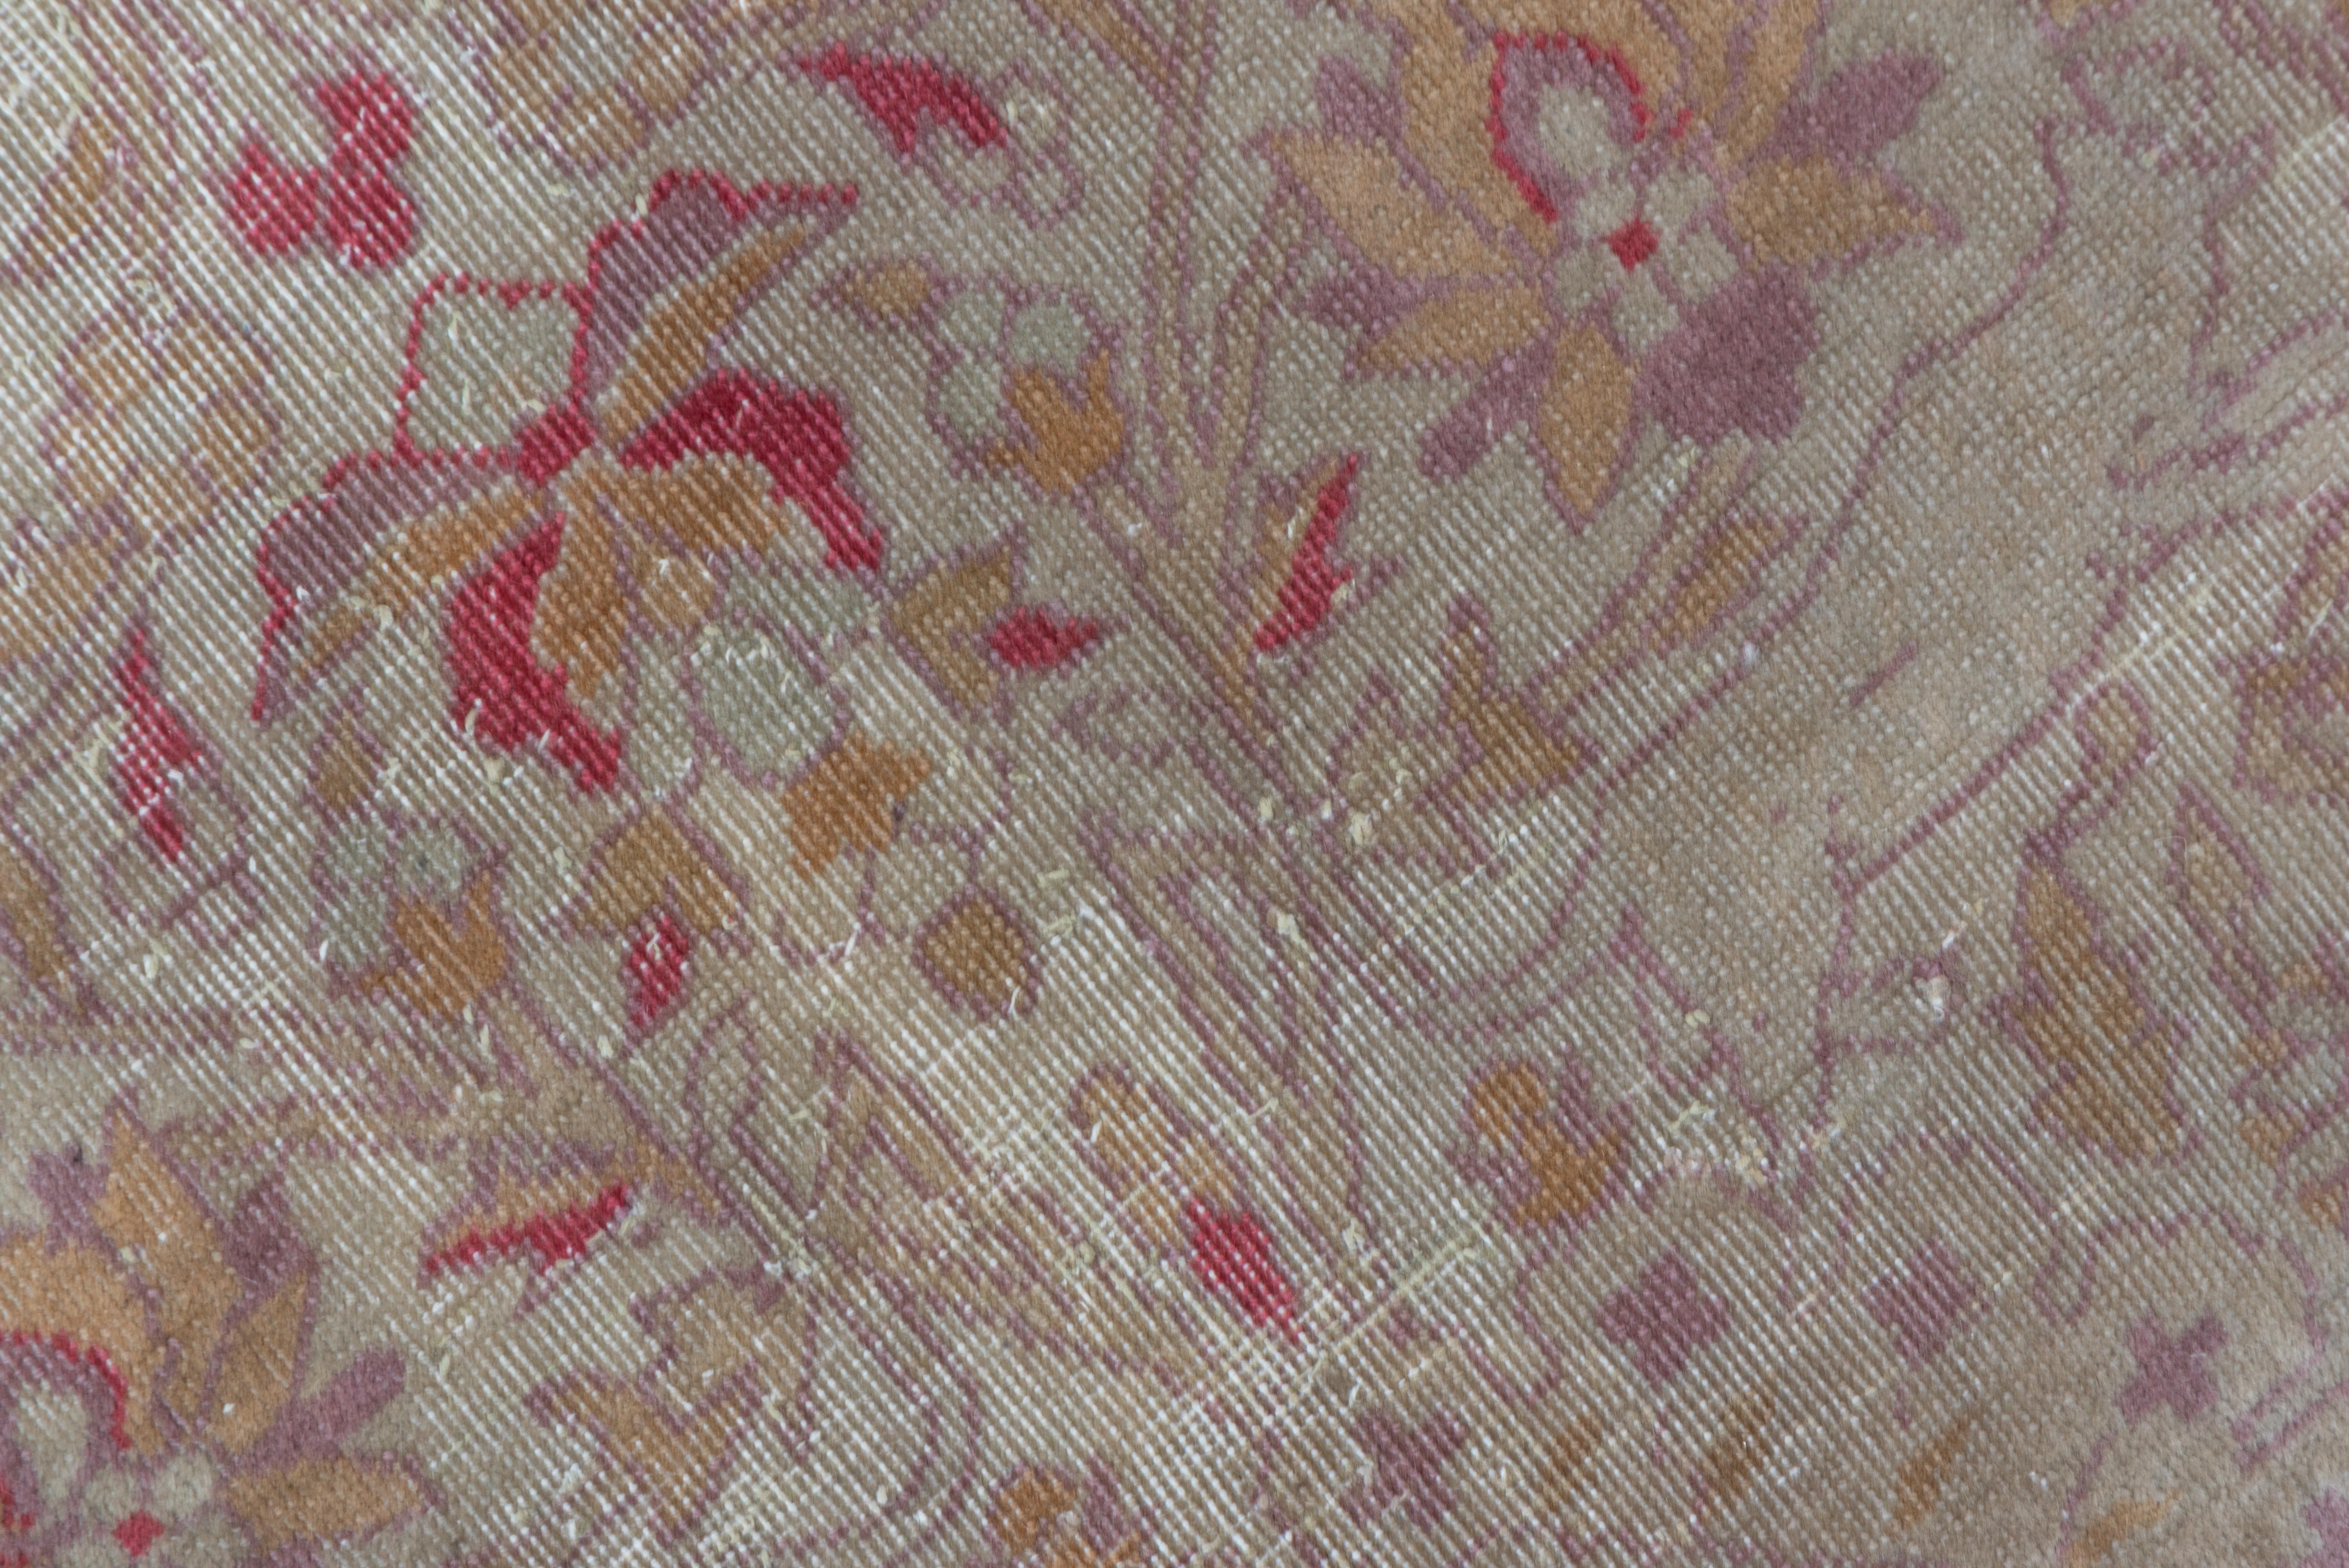 Wool Faded Sivas Elegance in Pink and Faded Tan Hues For Sale